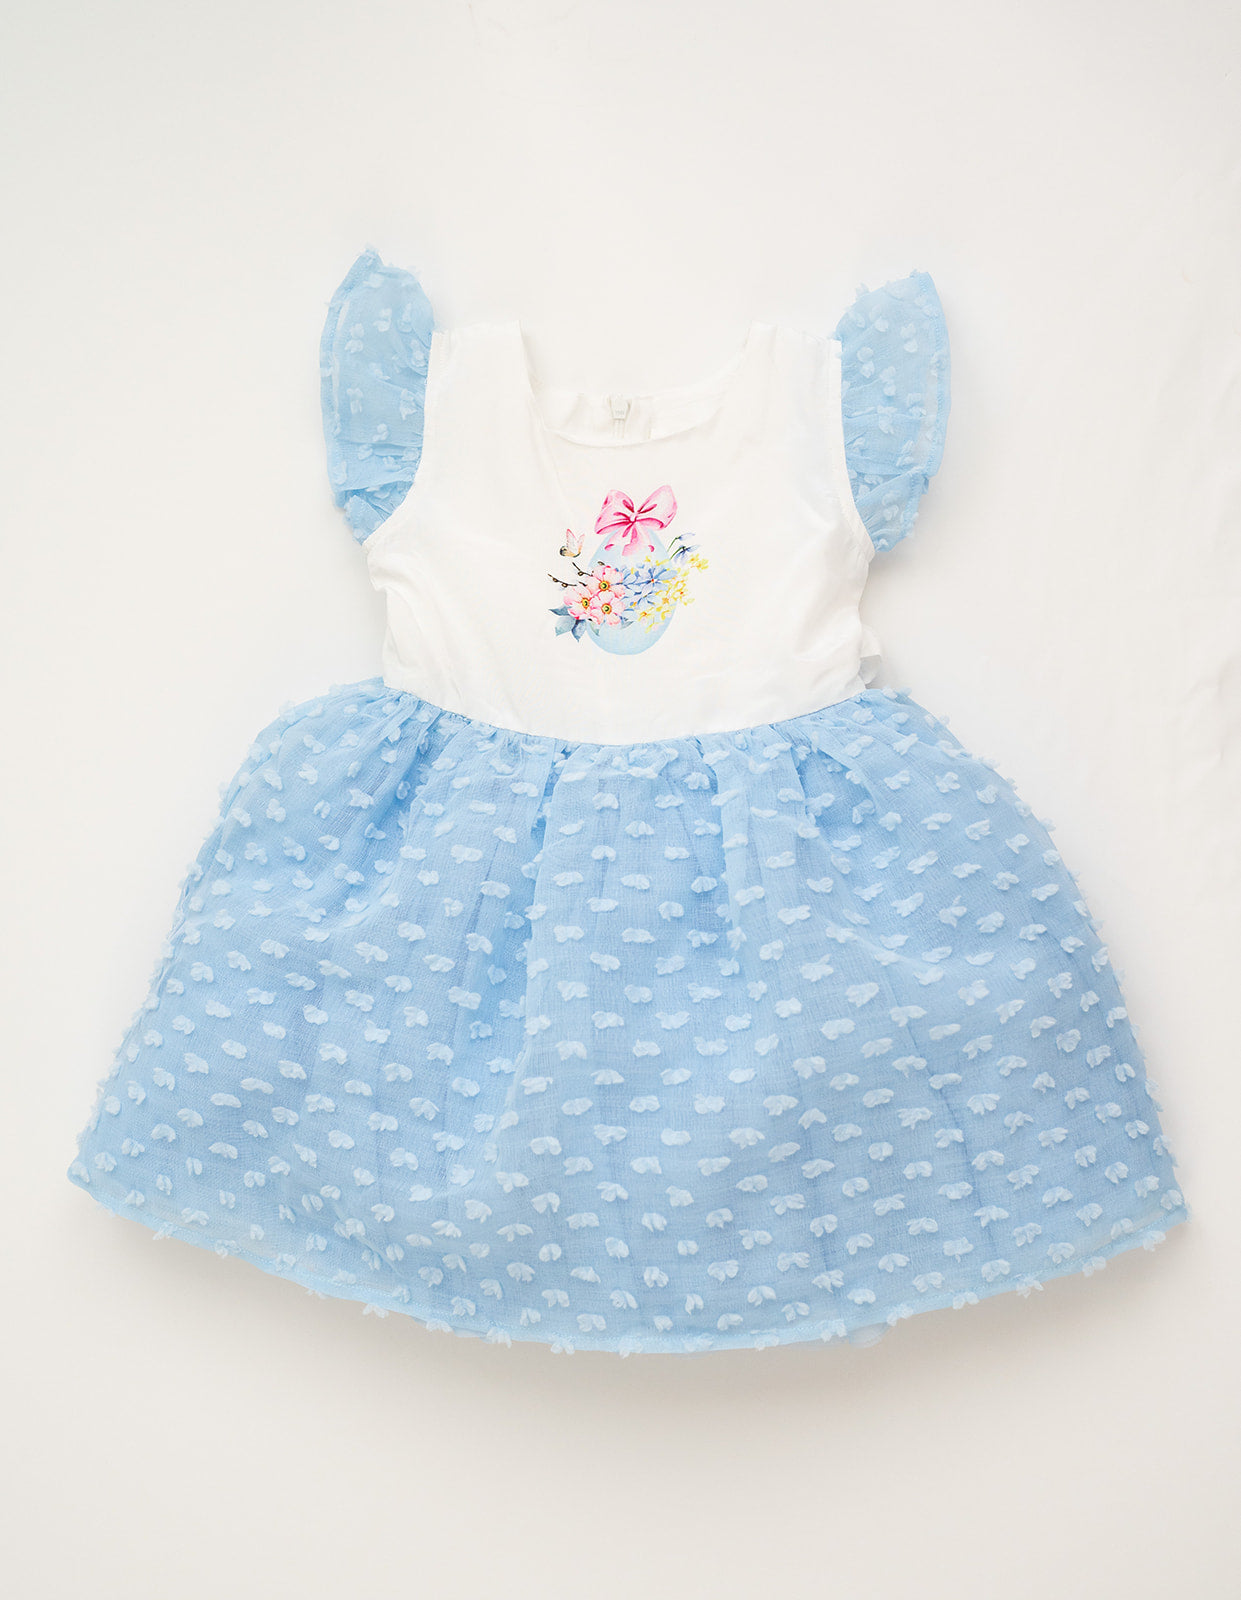 Butterfly Kisses Soft White and Cloud Blue Watercolor Printed Dotted Overlay Dress